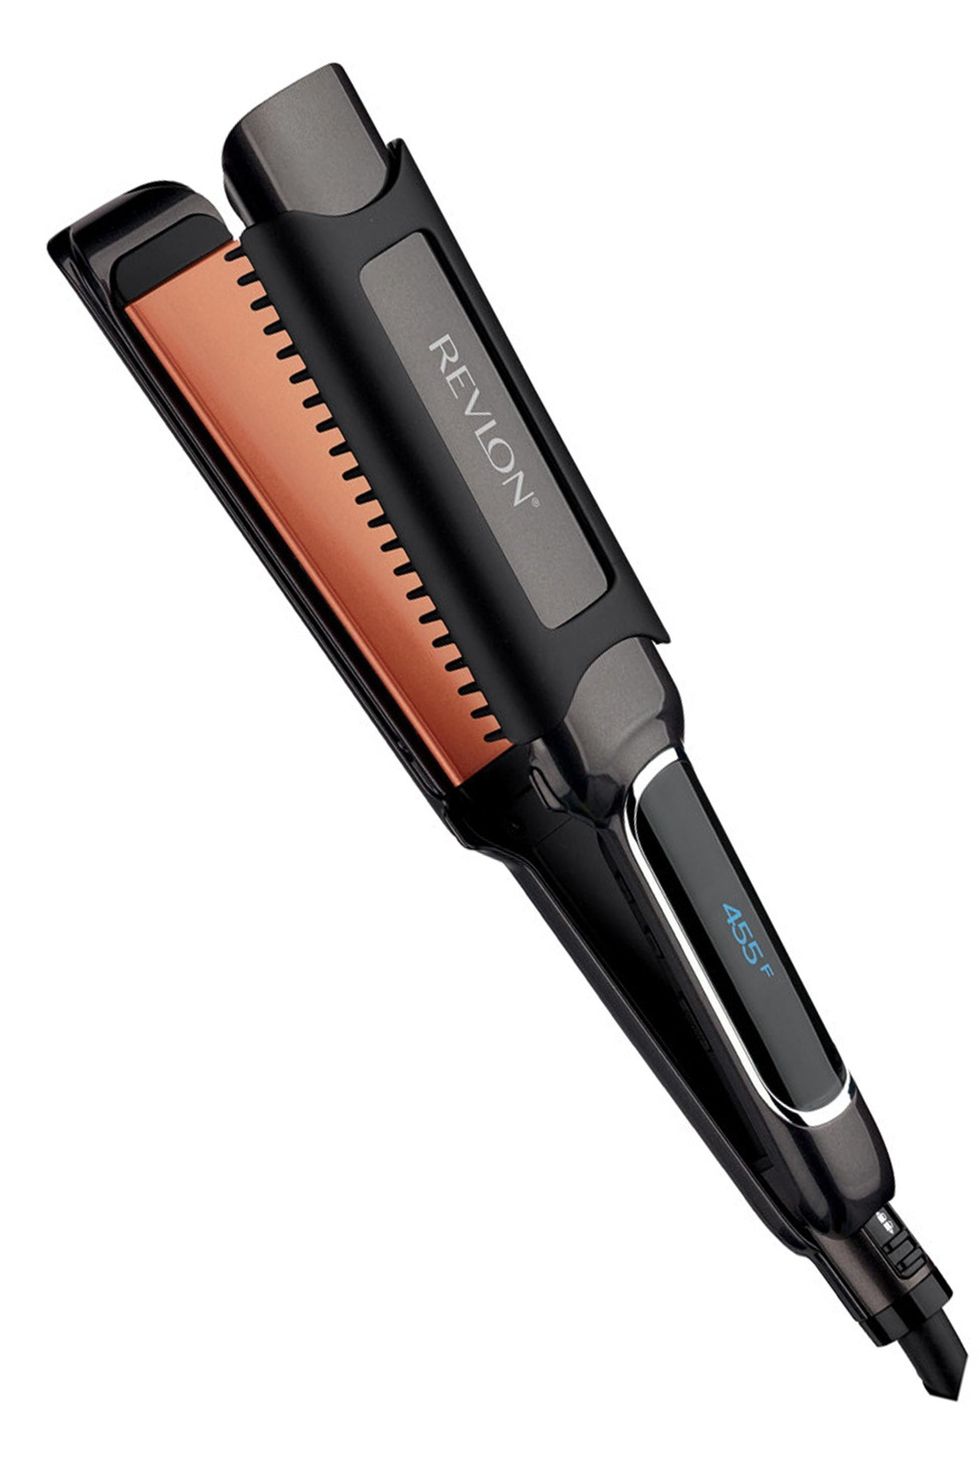 Top-rated Hair Straighteners For Fine Hair